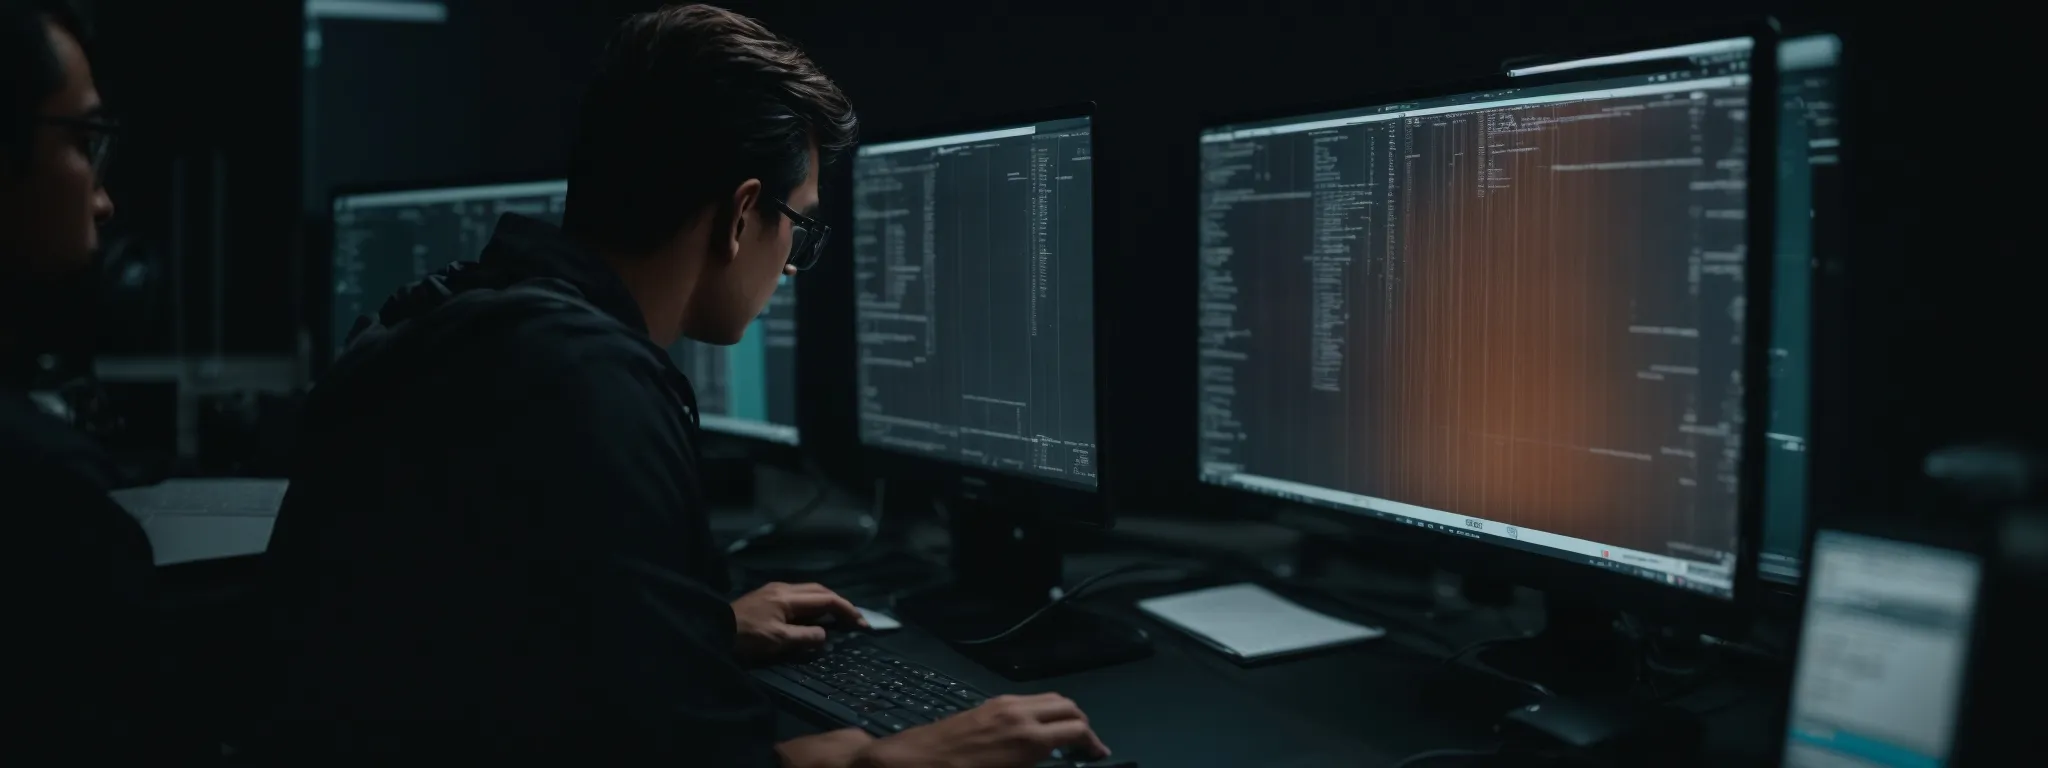 a web developer intently scrutinizes code on a computer screen, considering optimization strategies for a website's seo.